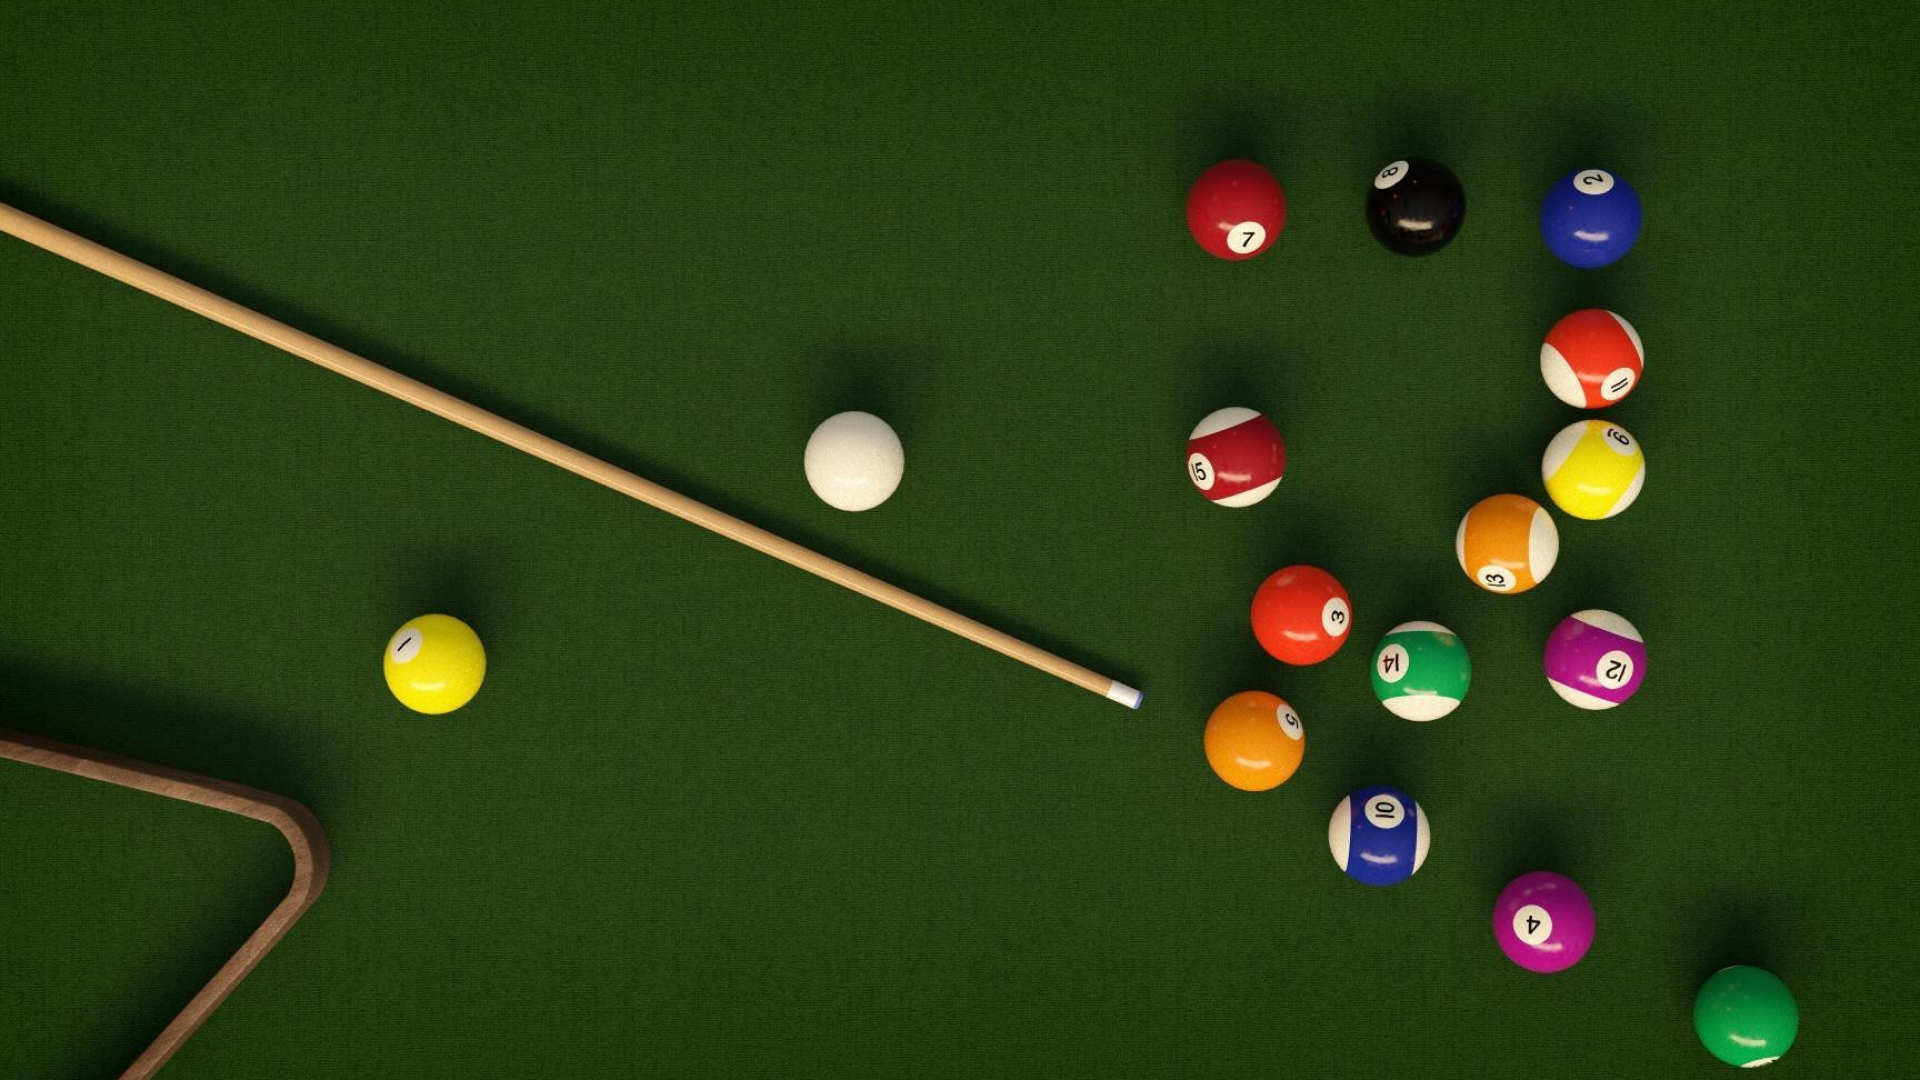 Pool (Cue Sports): Fifteen colored object balls, a cue ball and a rack on the table with a cue stick - equipment for billiards. 1920x1080 Full HD Wallpaper.